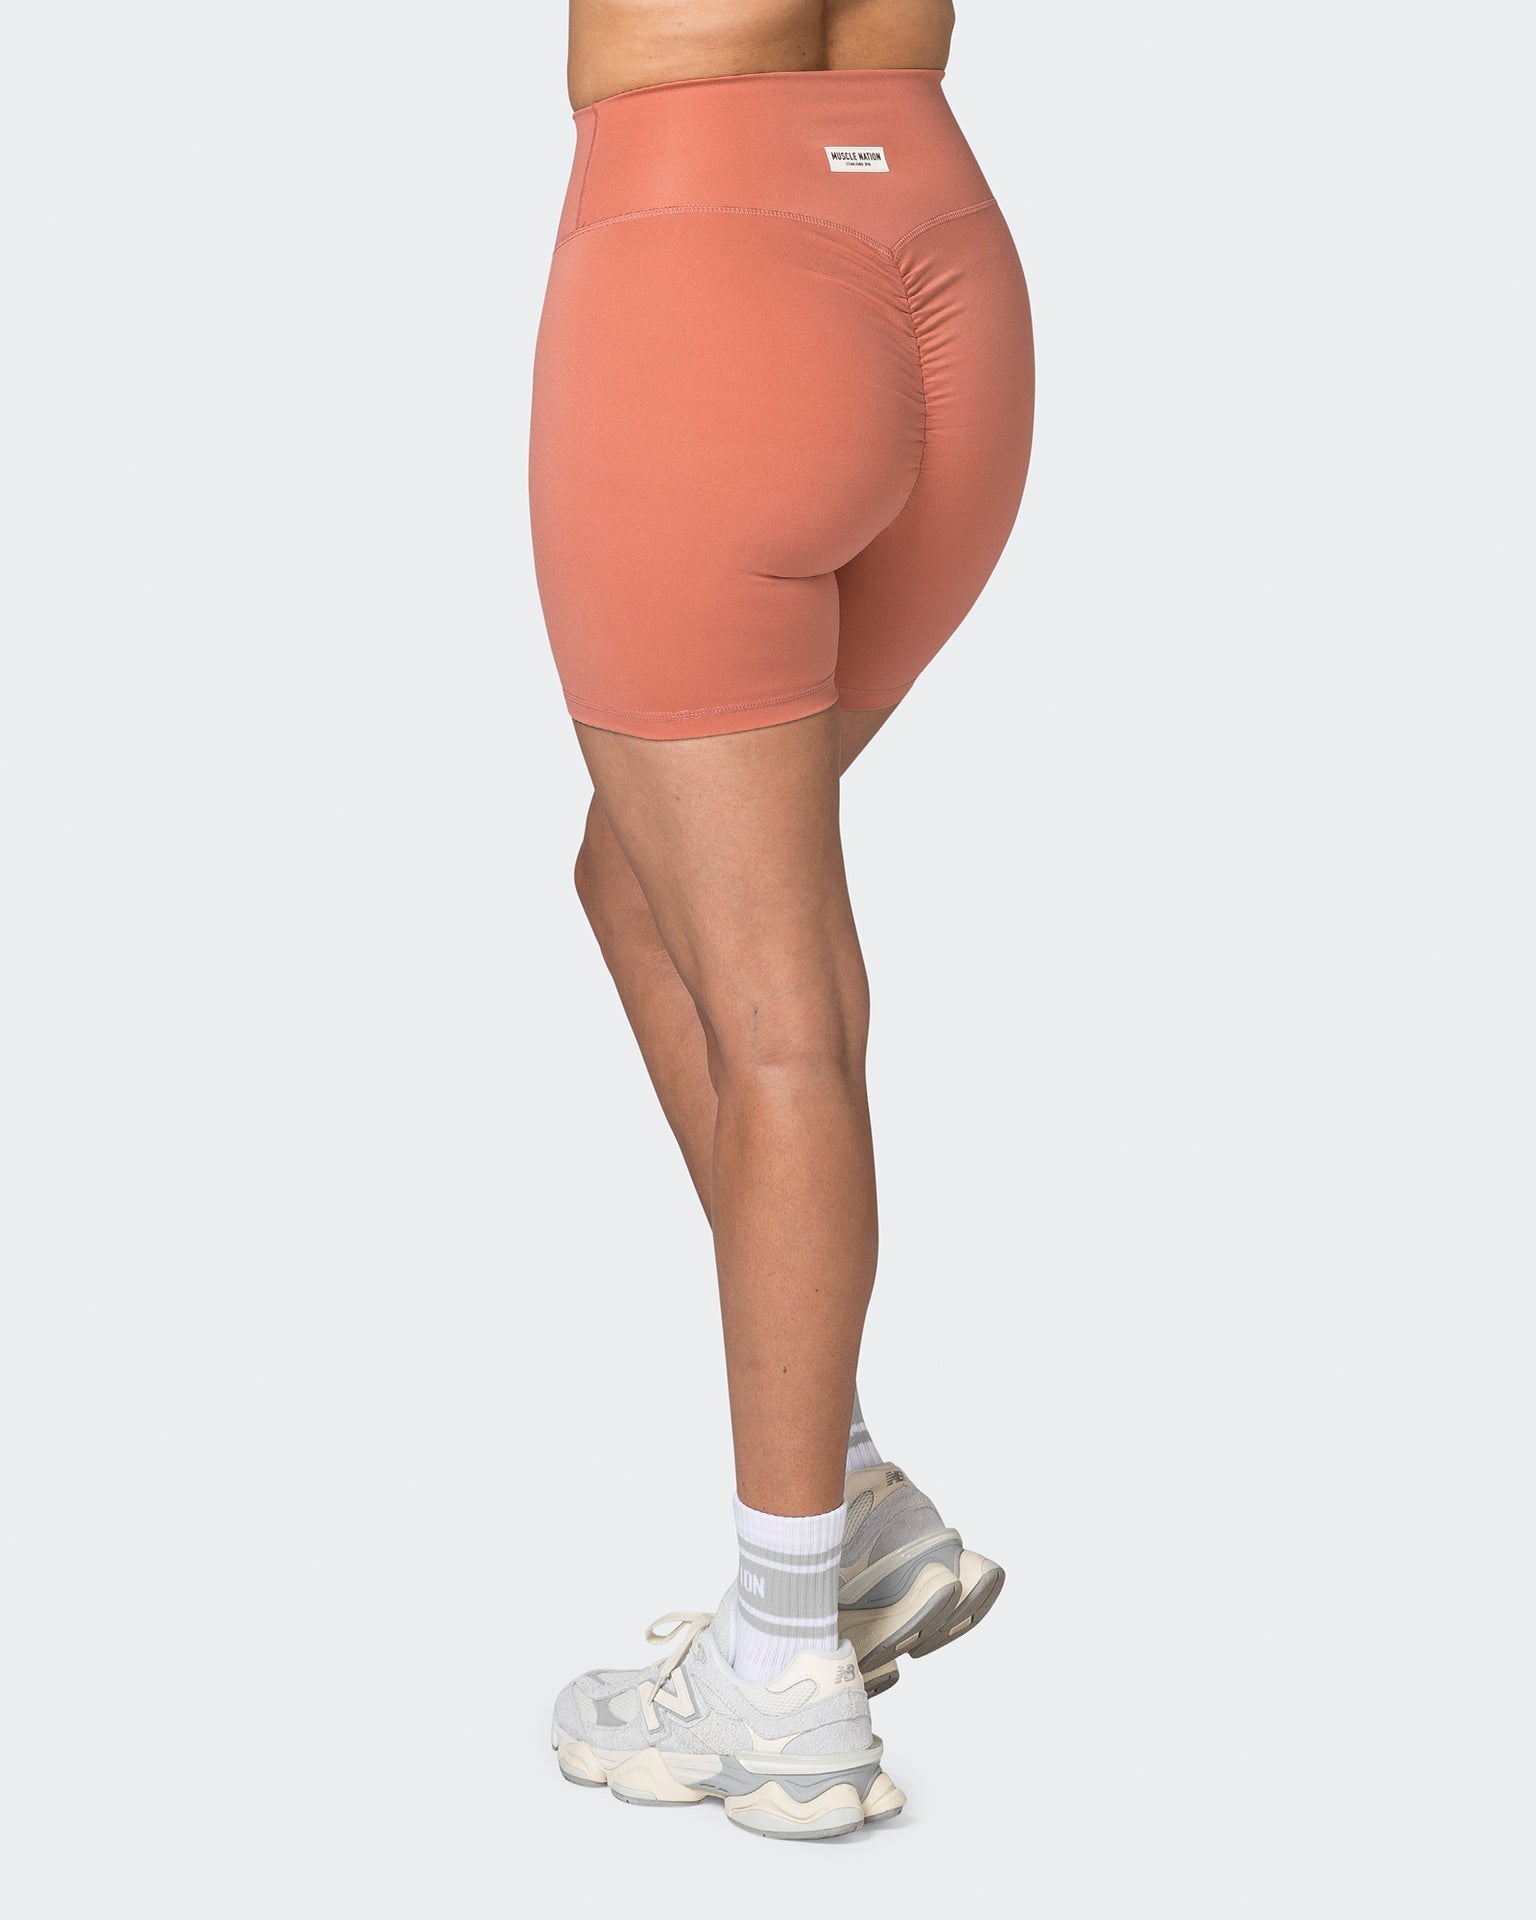 Muscle Nation Bike Shorts Game Changer Scrunch Midway Shorts - Powdered Pink